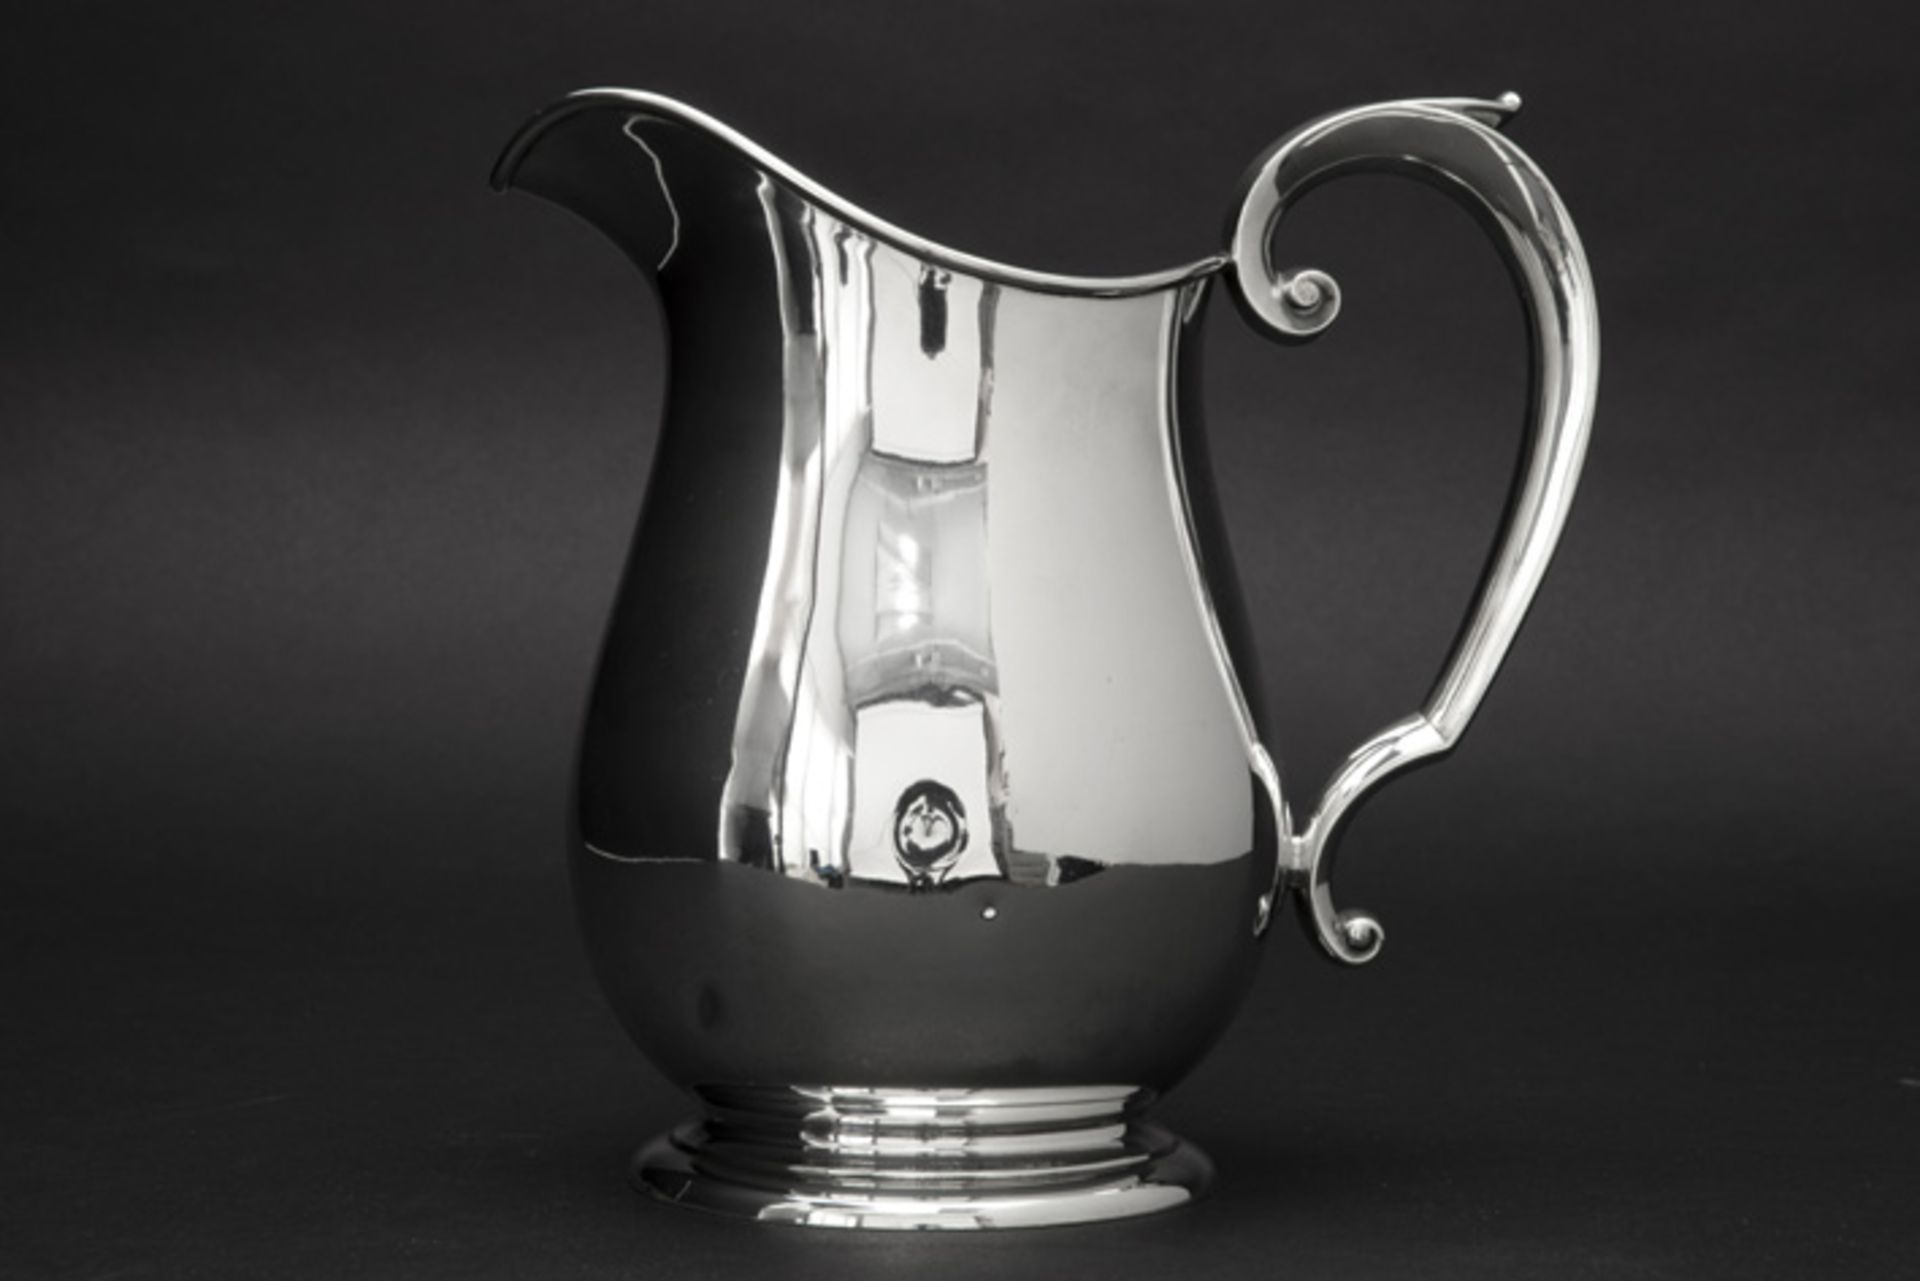 American Art Deco water jug in marked silver Amerikaanse Art Deco-waterkan in massief zilver, - Image 2 of 3